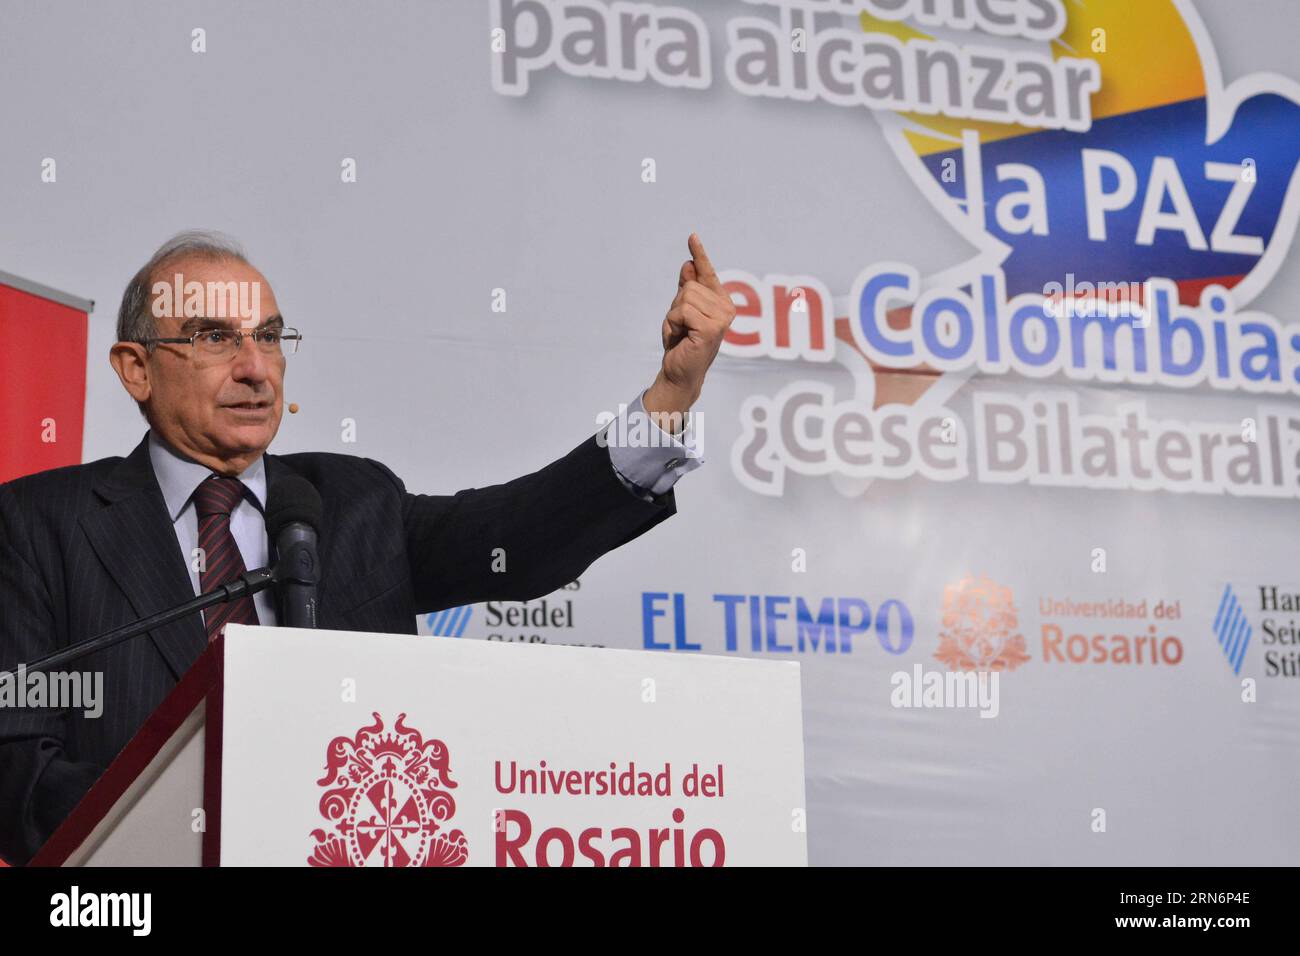 (150804) -- BOGOTA, Aug. 3, 2015 -- Humberto de la Calle, chief of the delegation of the Colombian Government in the peace talks with the Armed Revolutionary Forces of Colombia (FARC), delivers a speech during the forum Contributions to reach the peace in Colombia: Bilateral cease? , that is held in the Rosario University, in Bogota, Colombia, on Aug. 3, 2015. According to the local press, the Government of Colombia will analyze the application of a bilateral and indefinite cease with the FARC in November. Garman Enciso/) (da) MANDATORY CREDIT NO SALES-NO ARCHIVE EDITORIAL USE ONLY COLOMBIA OU Stock Photo